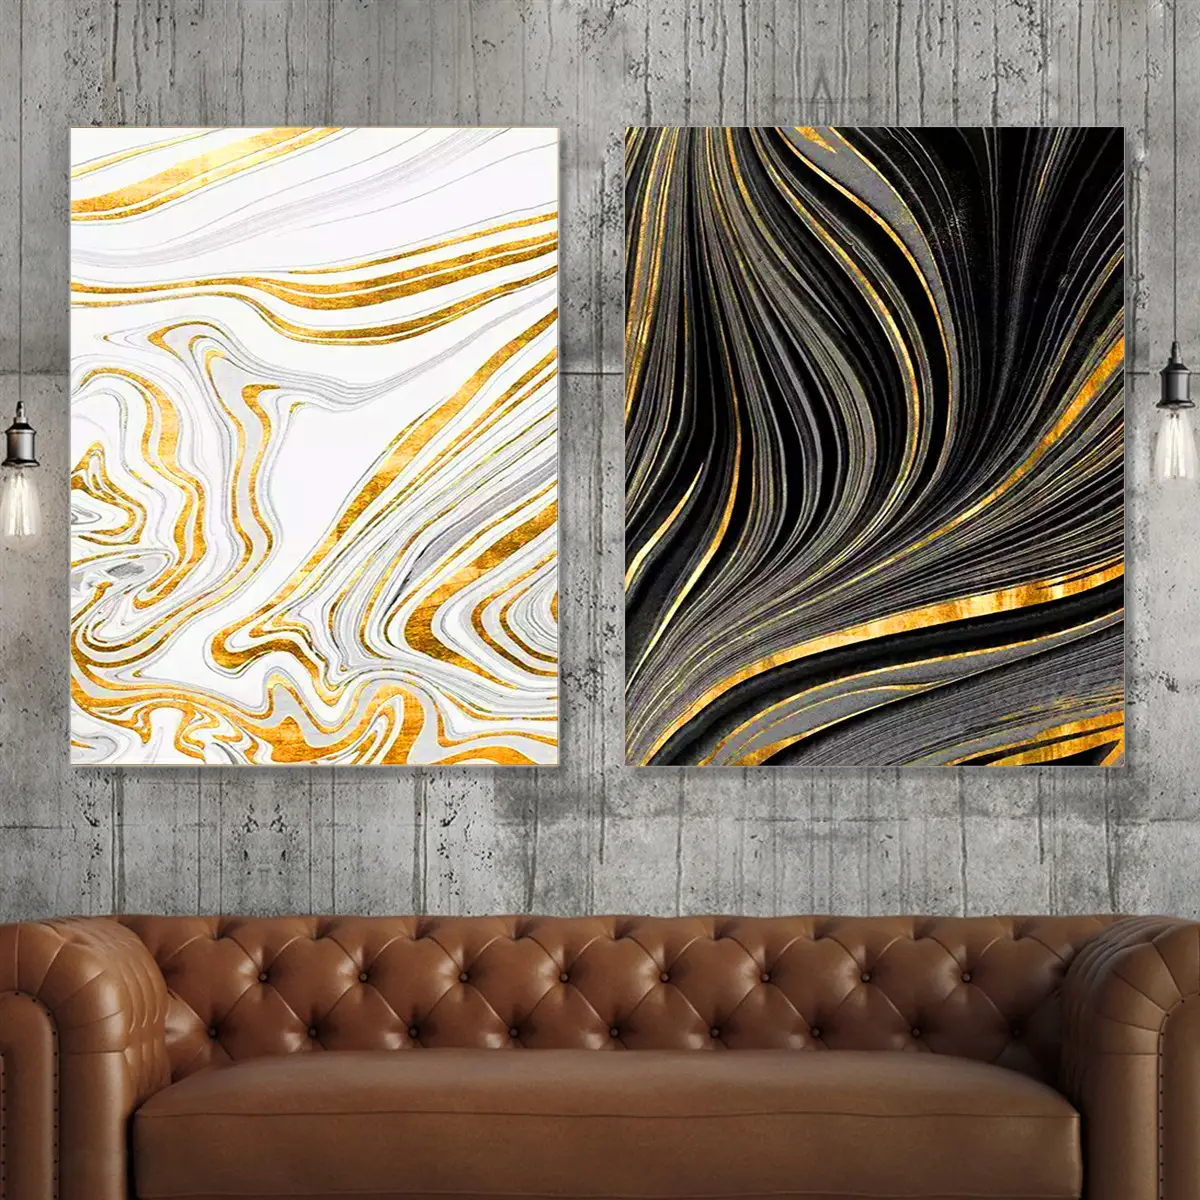 Abstract Flowing Texture Gold black and white Canvas Art Poster Print Home Decor